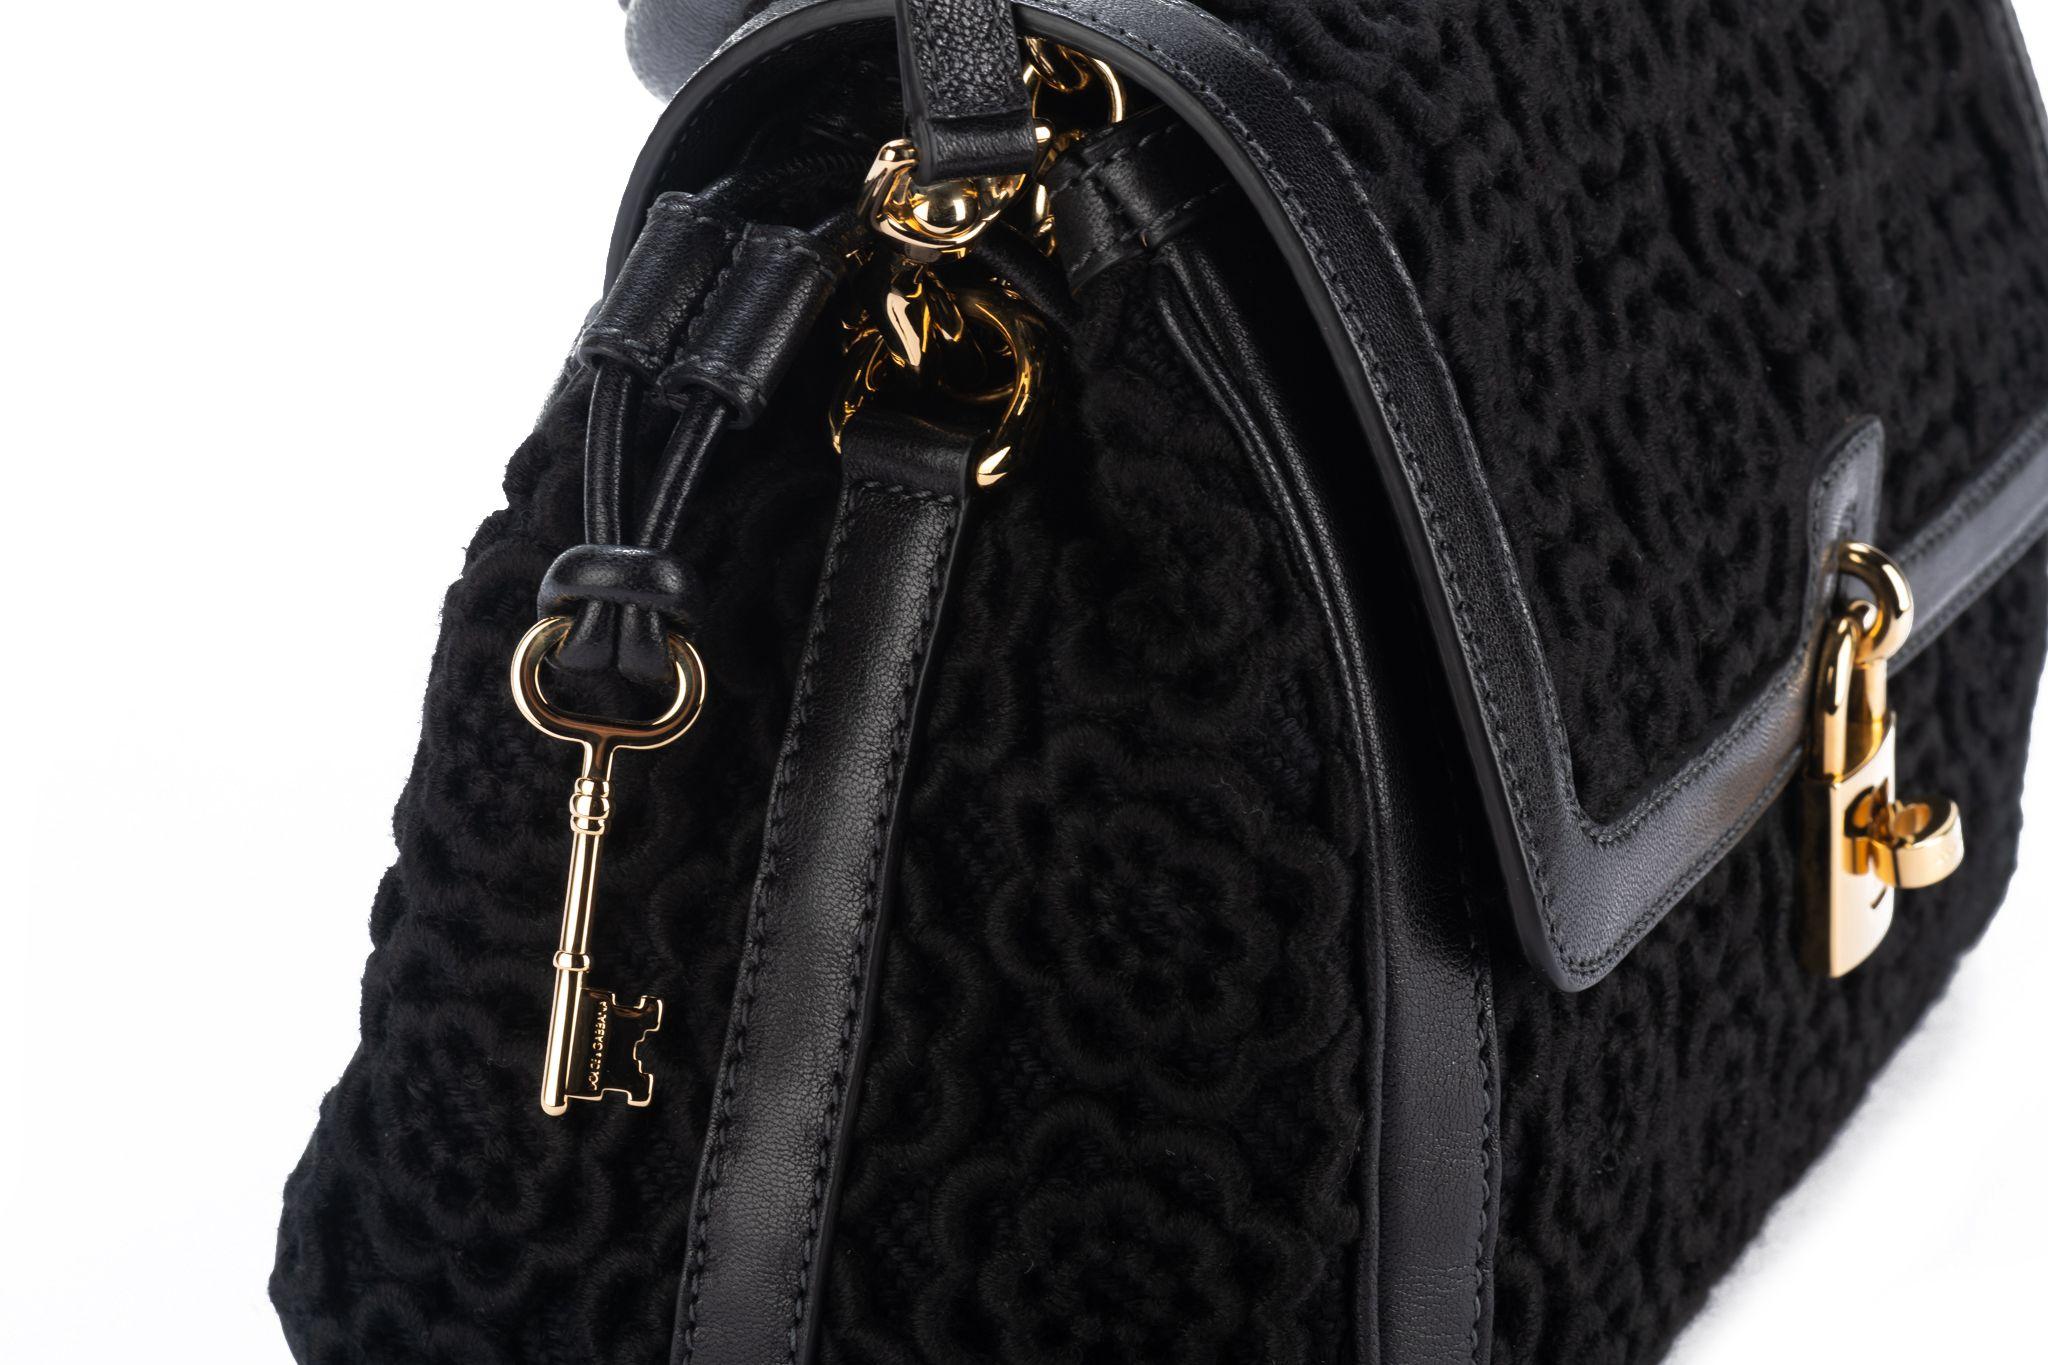 Dolce & Gabbana New Black Macrame Bag In New Condition For Sale In West Hollywood, CA